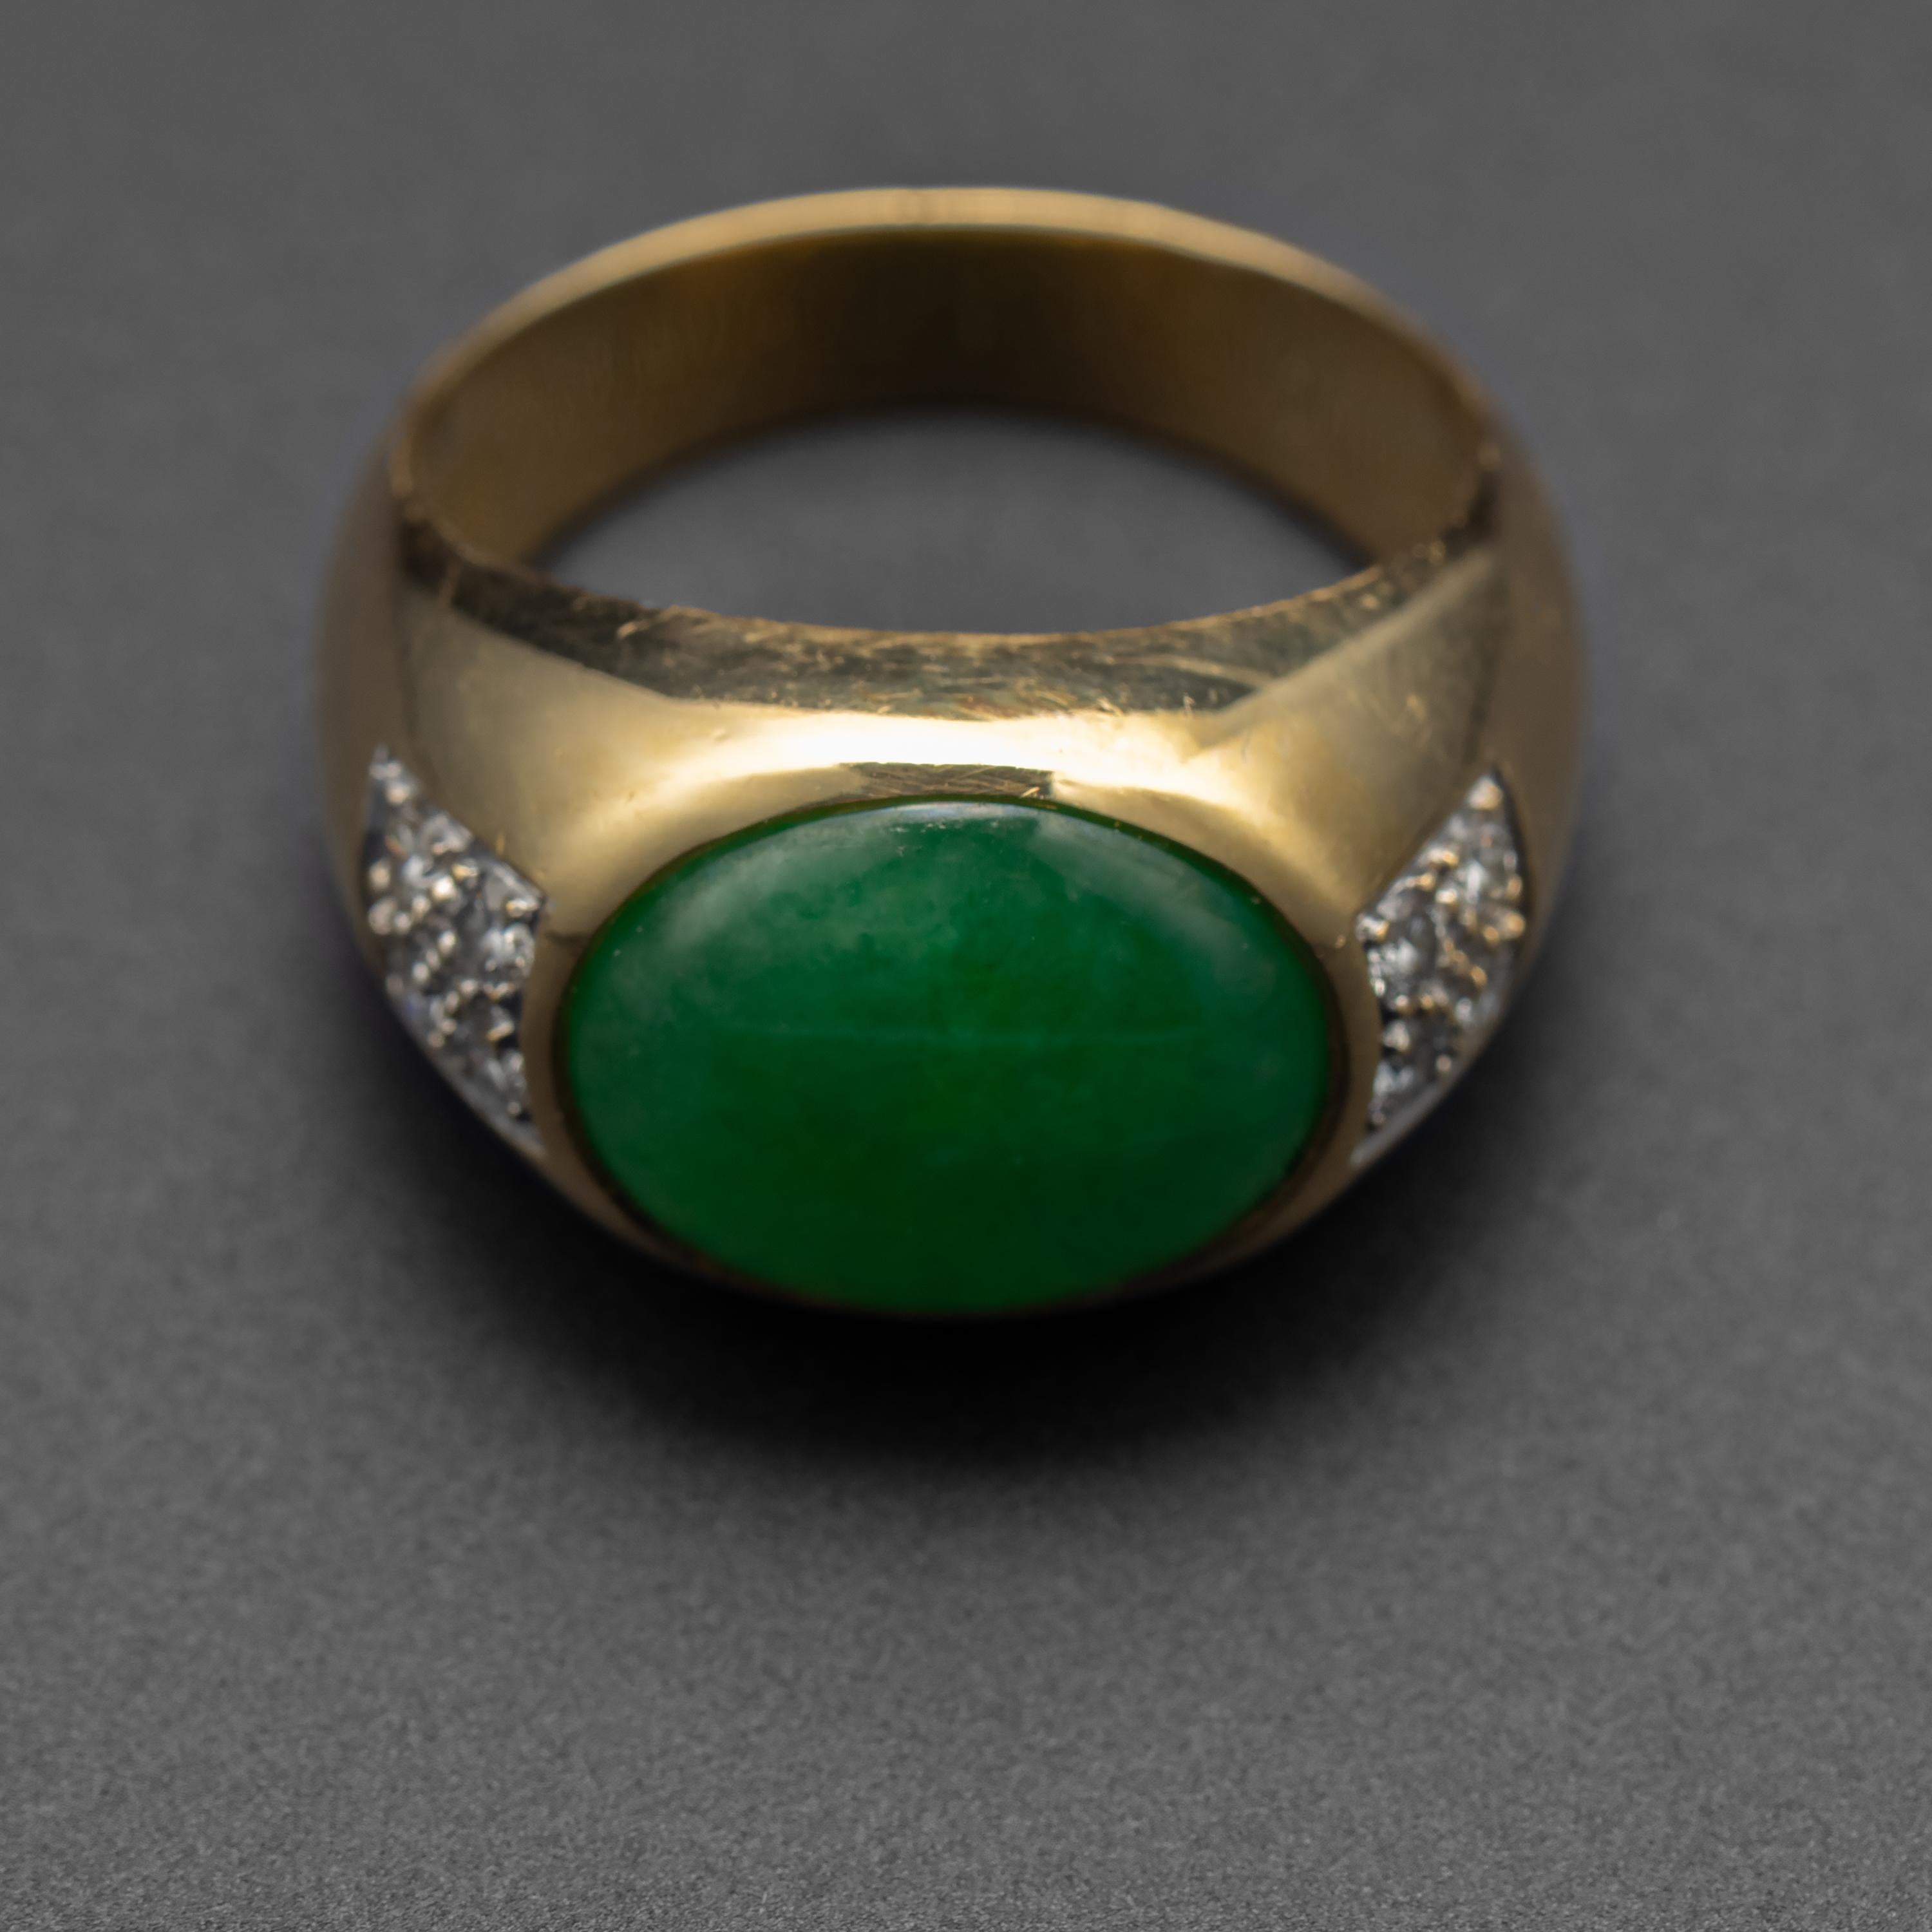 Contemporary Men's Jade and Diamond Ring circa 1980s Certified Untreated